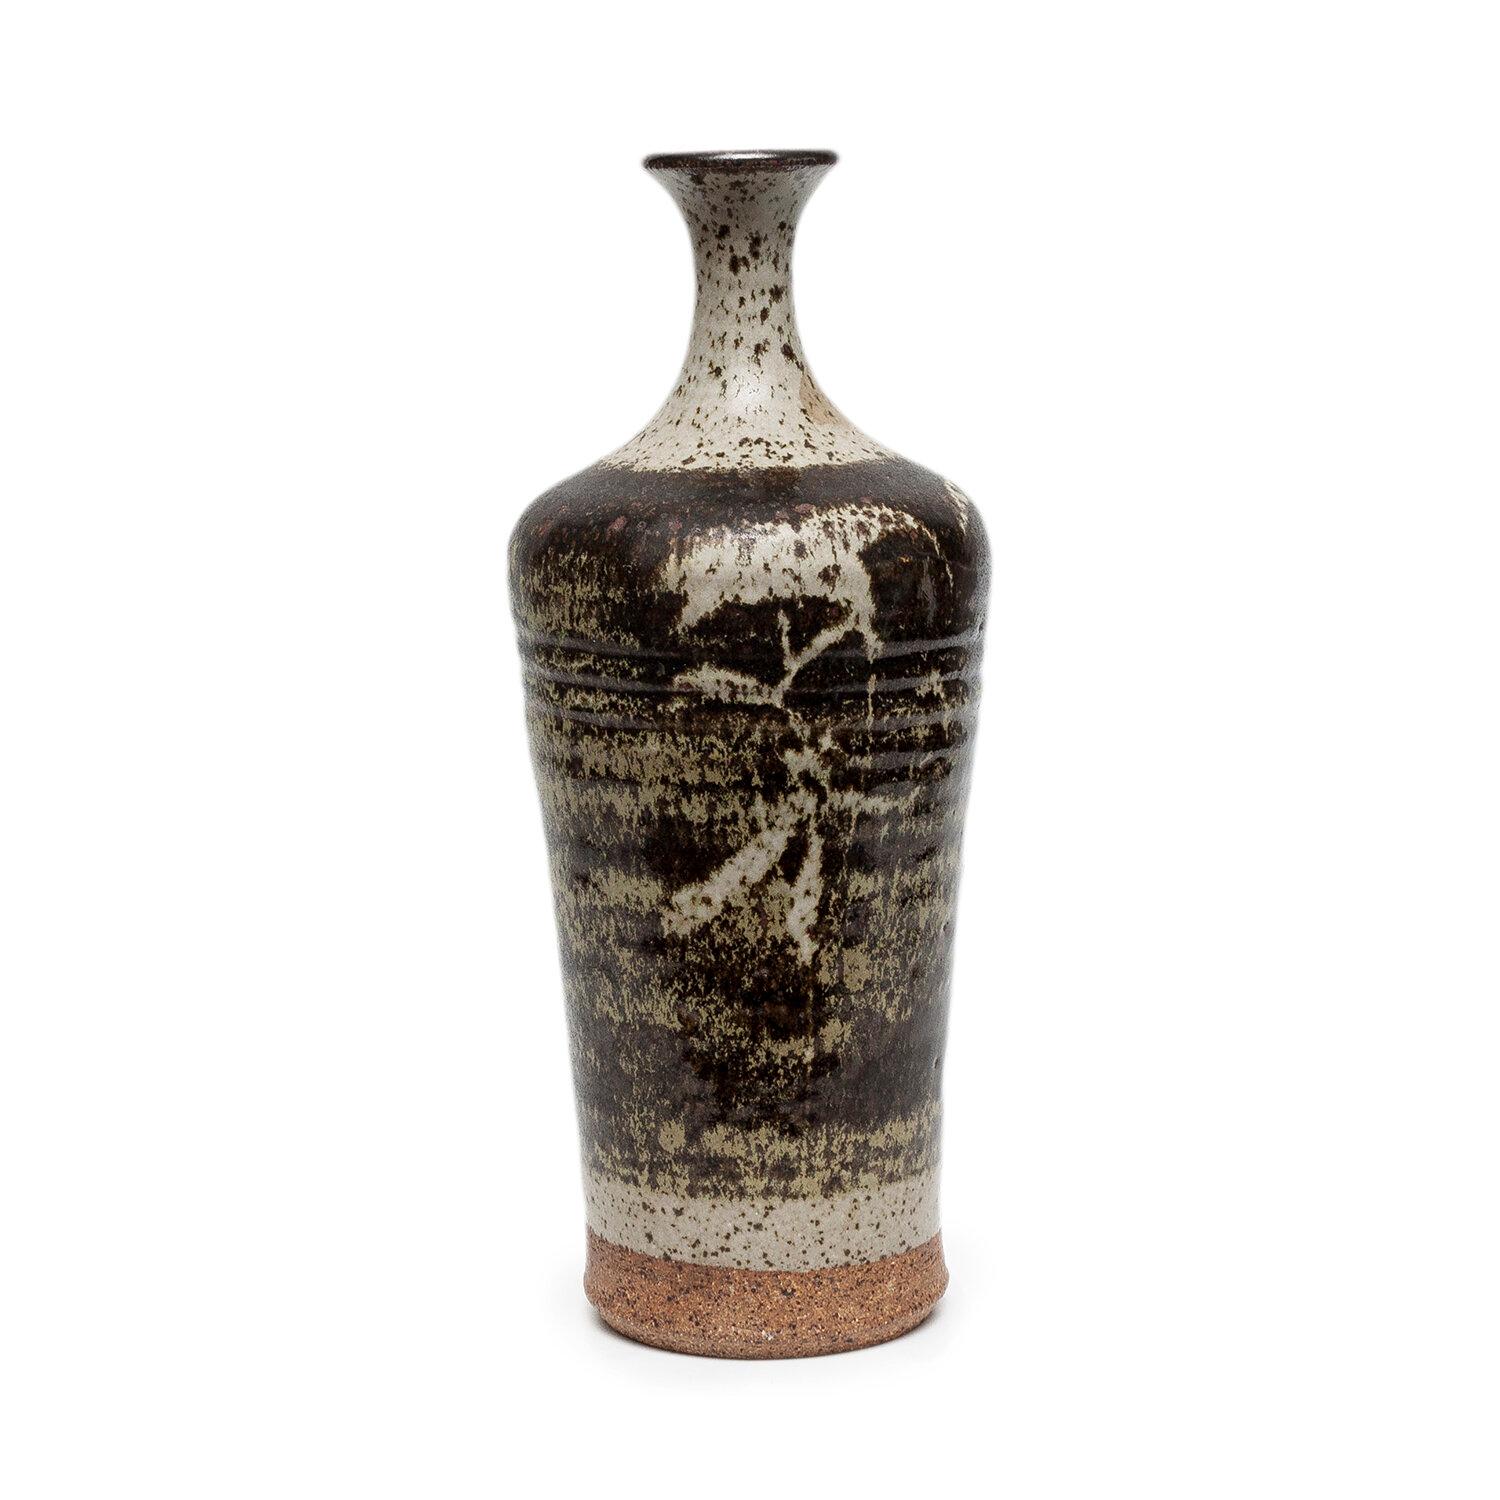 Rare bottle vase form by Peter Voulkos.  midcentury modern.
Peter Voulkos
stoneware and glaze
11.25 x 4.75 x 4.75”
circa 1960
signed “Voulkos” on base

A West Coast potter and sculptor, Peter Voulkos (1924-2002) led in the development of pottery as